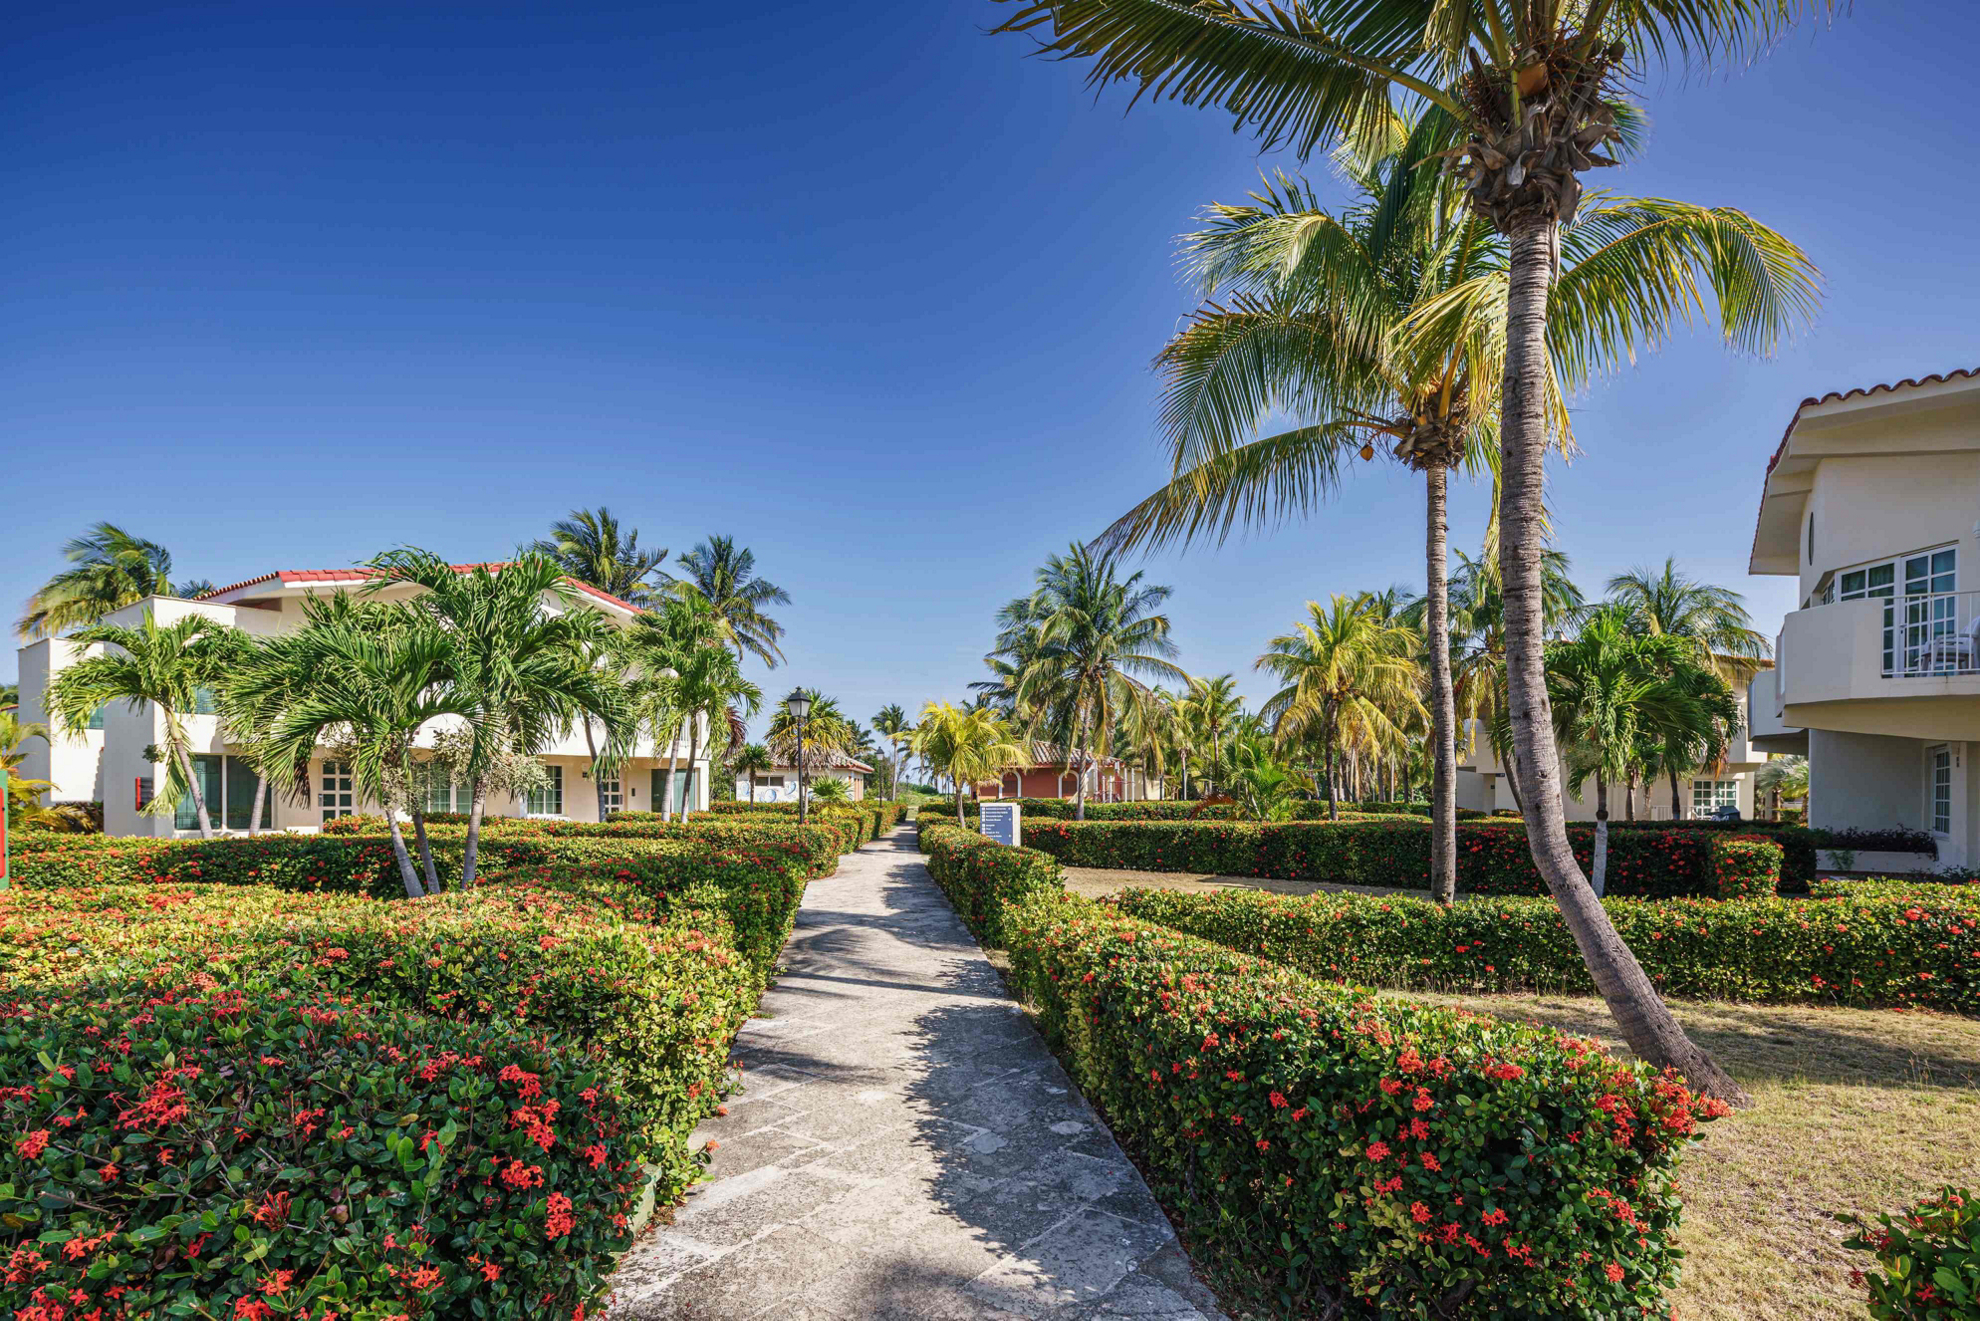 Barceló Solymar Varadero: A palm tree lined view of the hotel gardens and villas in the background